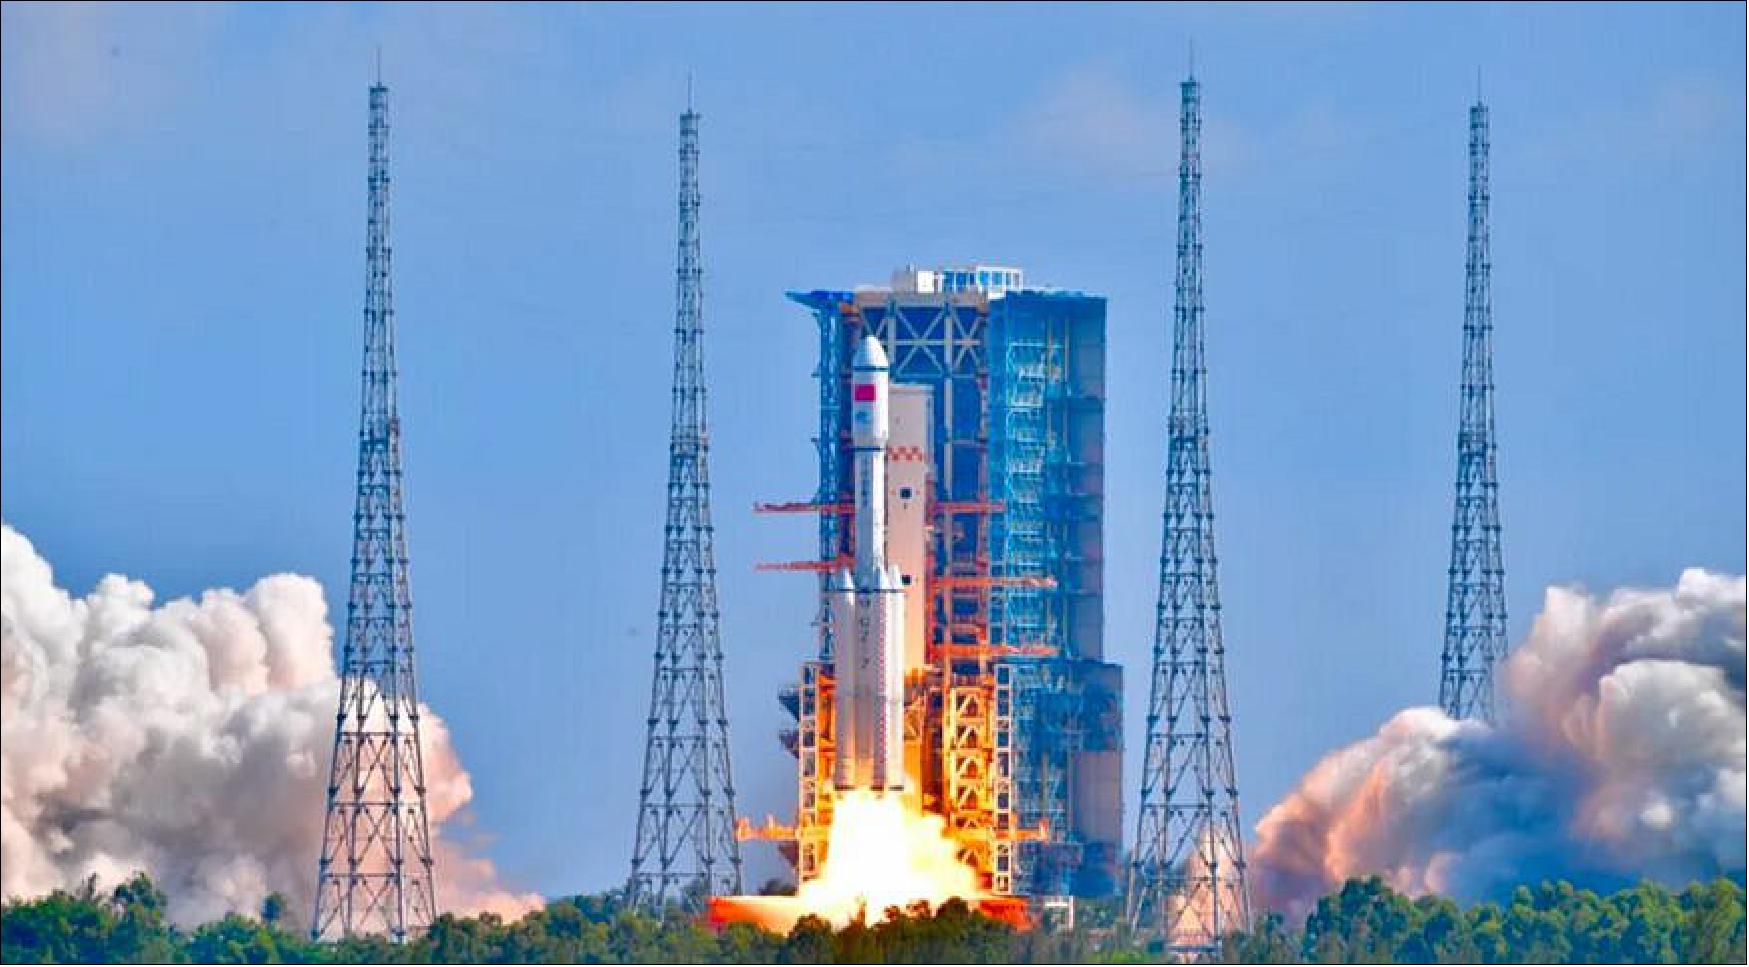 Figure 42: Liftoff of the Long March 7 rocket carrying Tianzhou-3 into orbit on September 20, 2021 (image credit: CCTV)